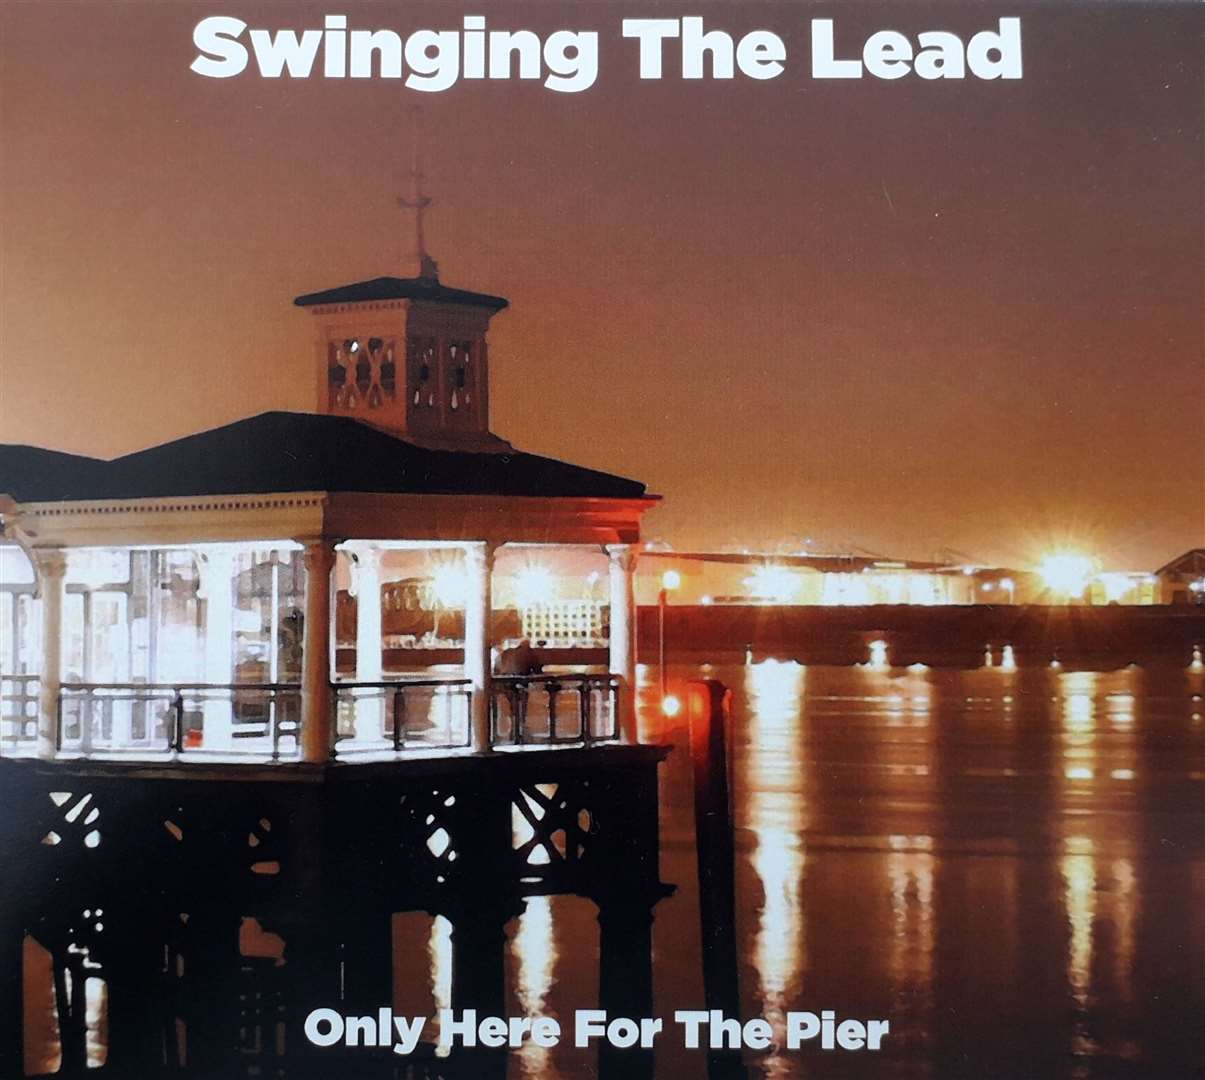 Swinging The Lead's album, Only Here For The Pier, shot at Gravesend's Town Pier